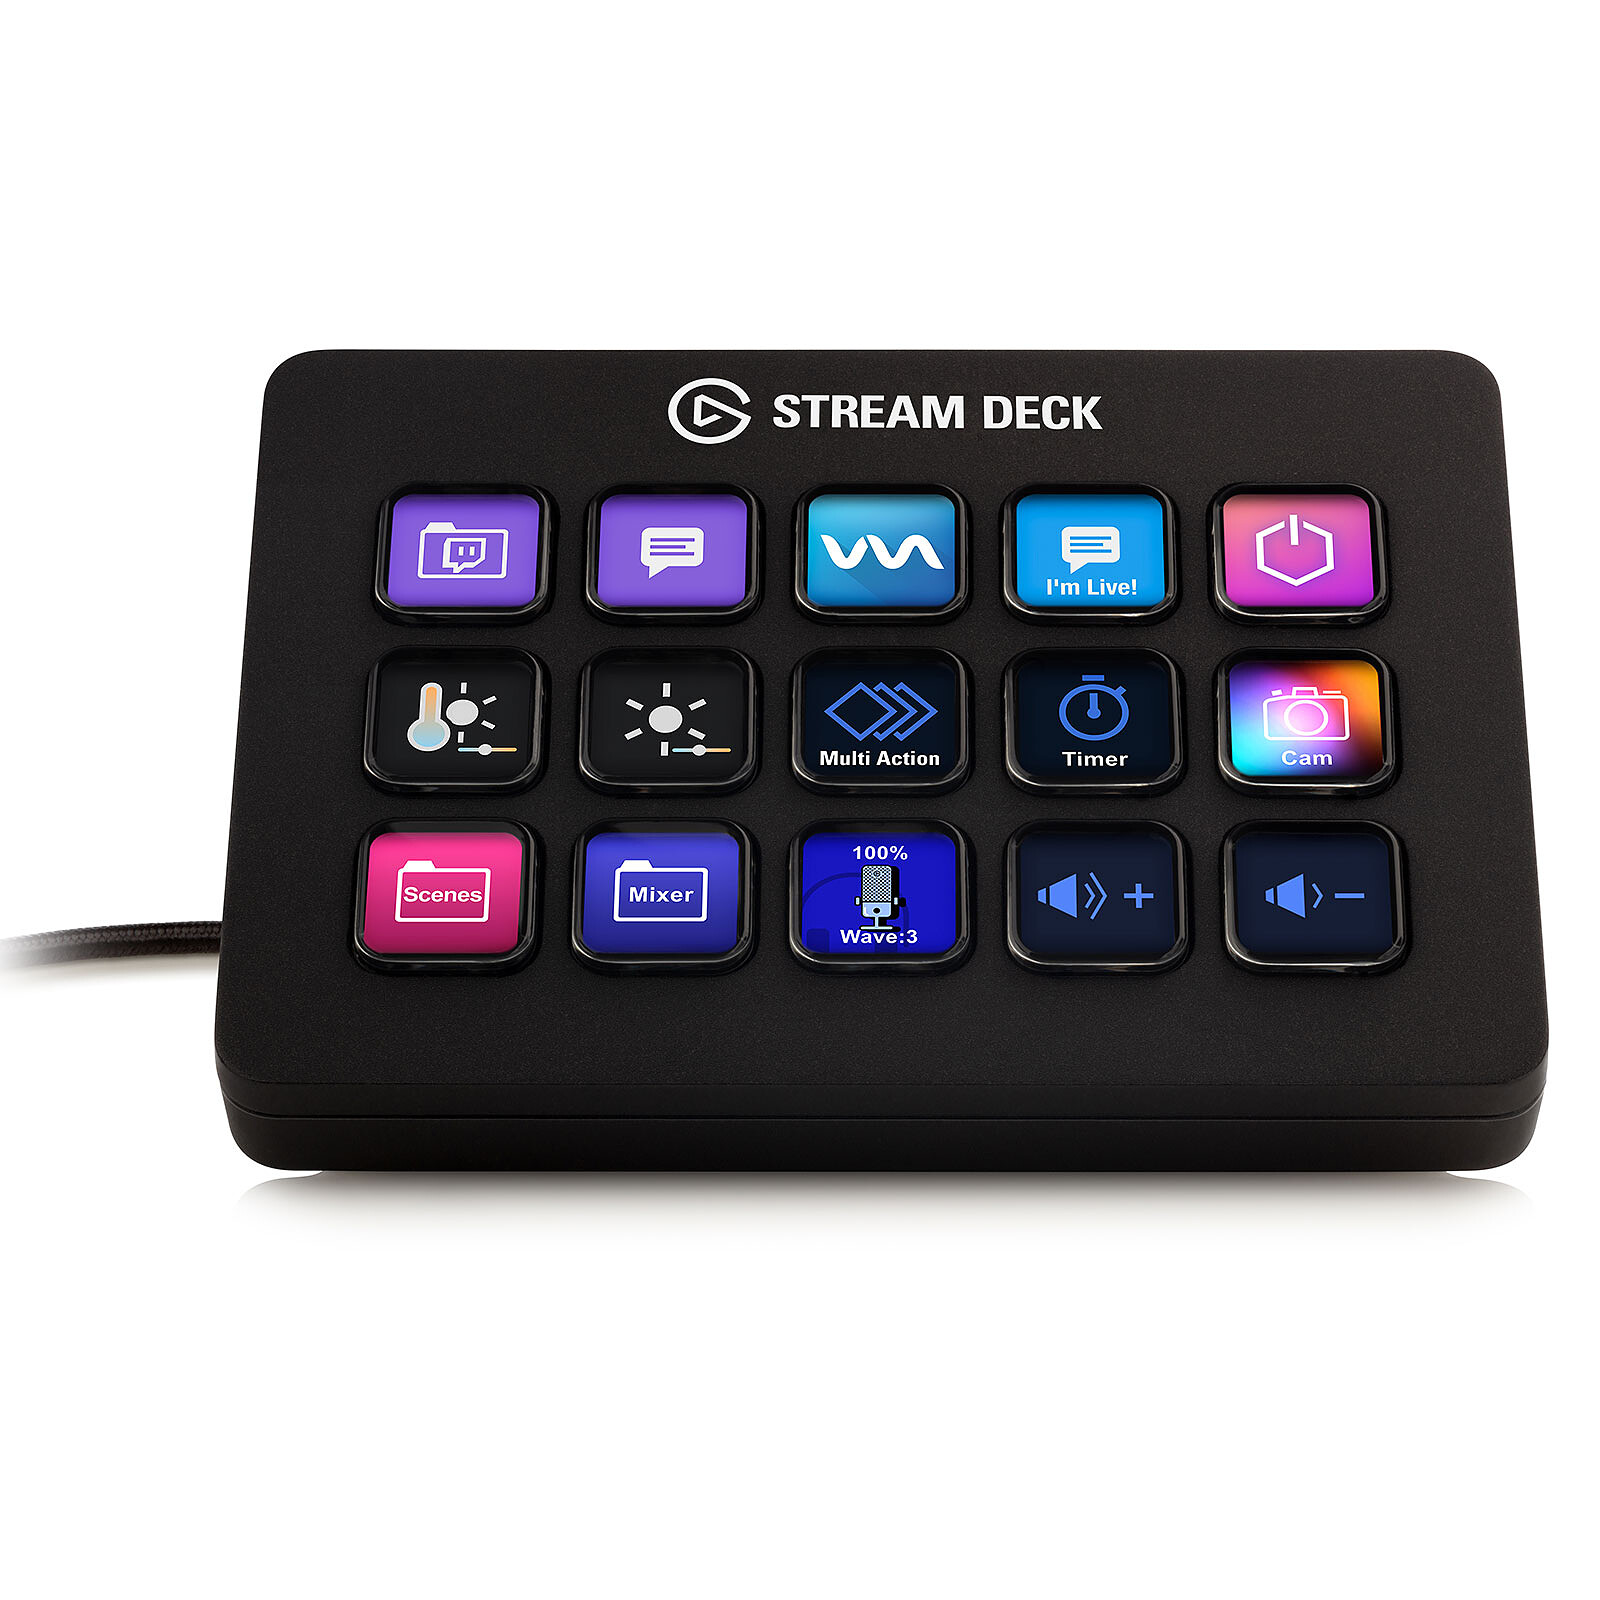 Elgato Stream Deck Mini review -- an improvement with fewer